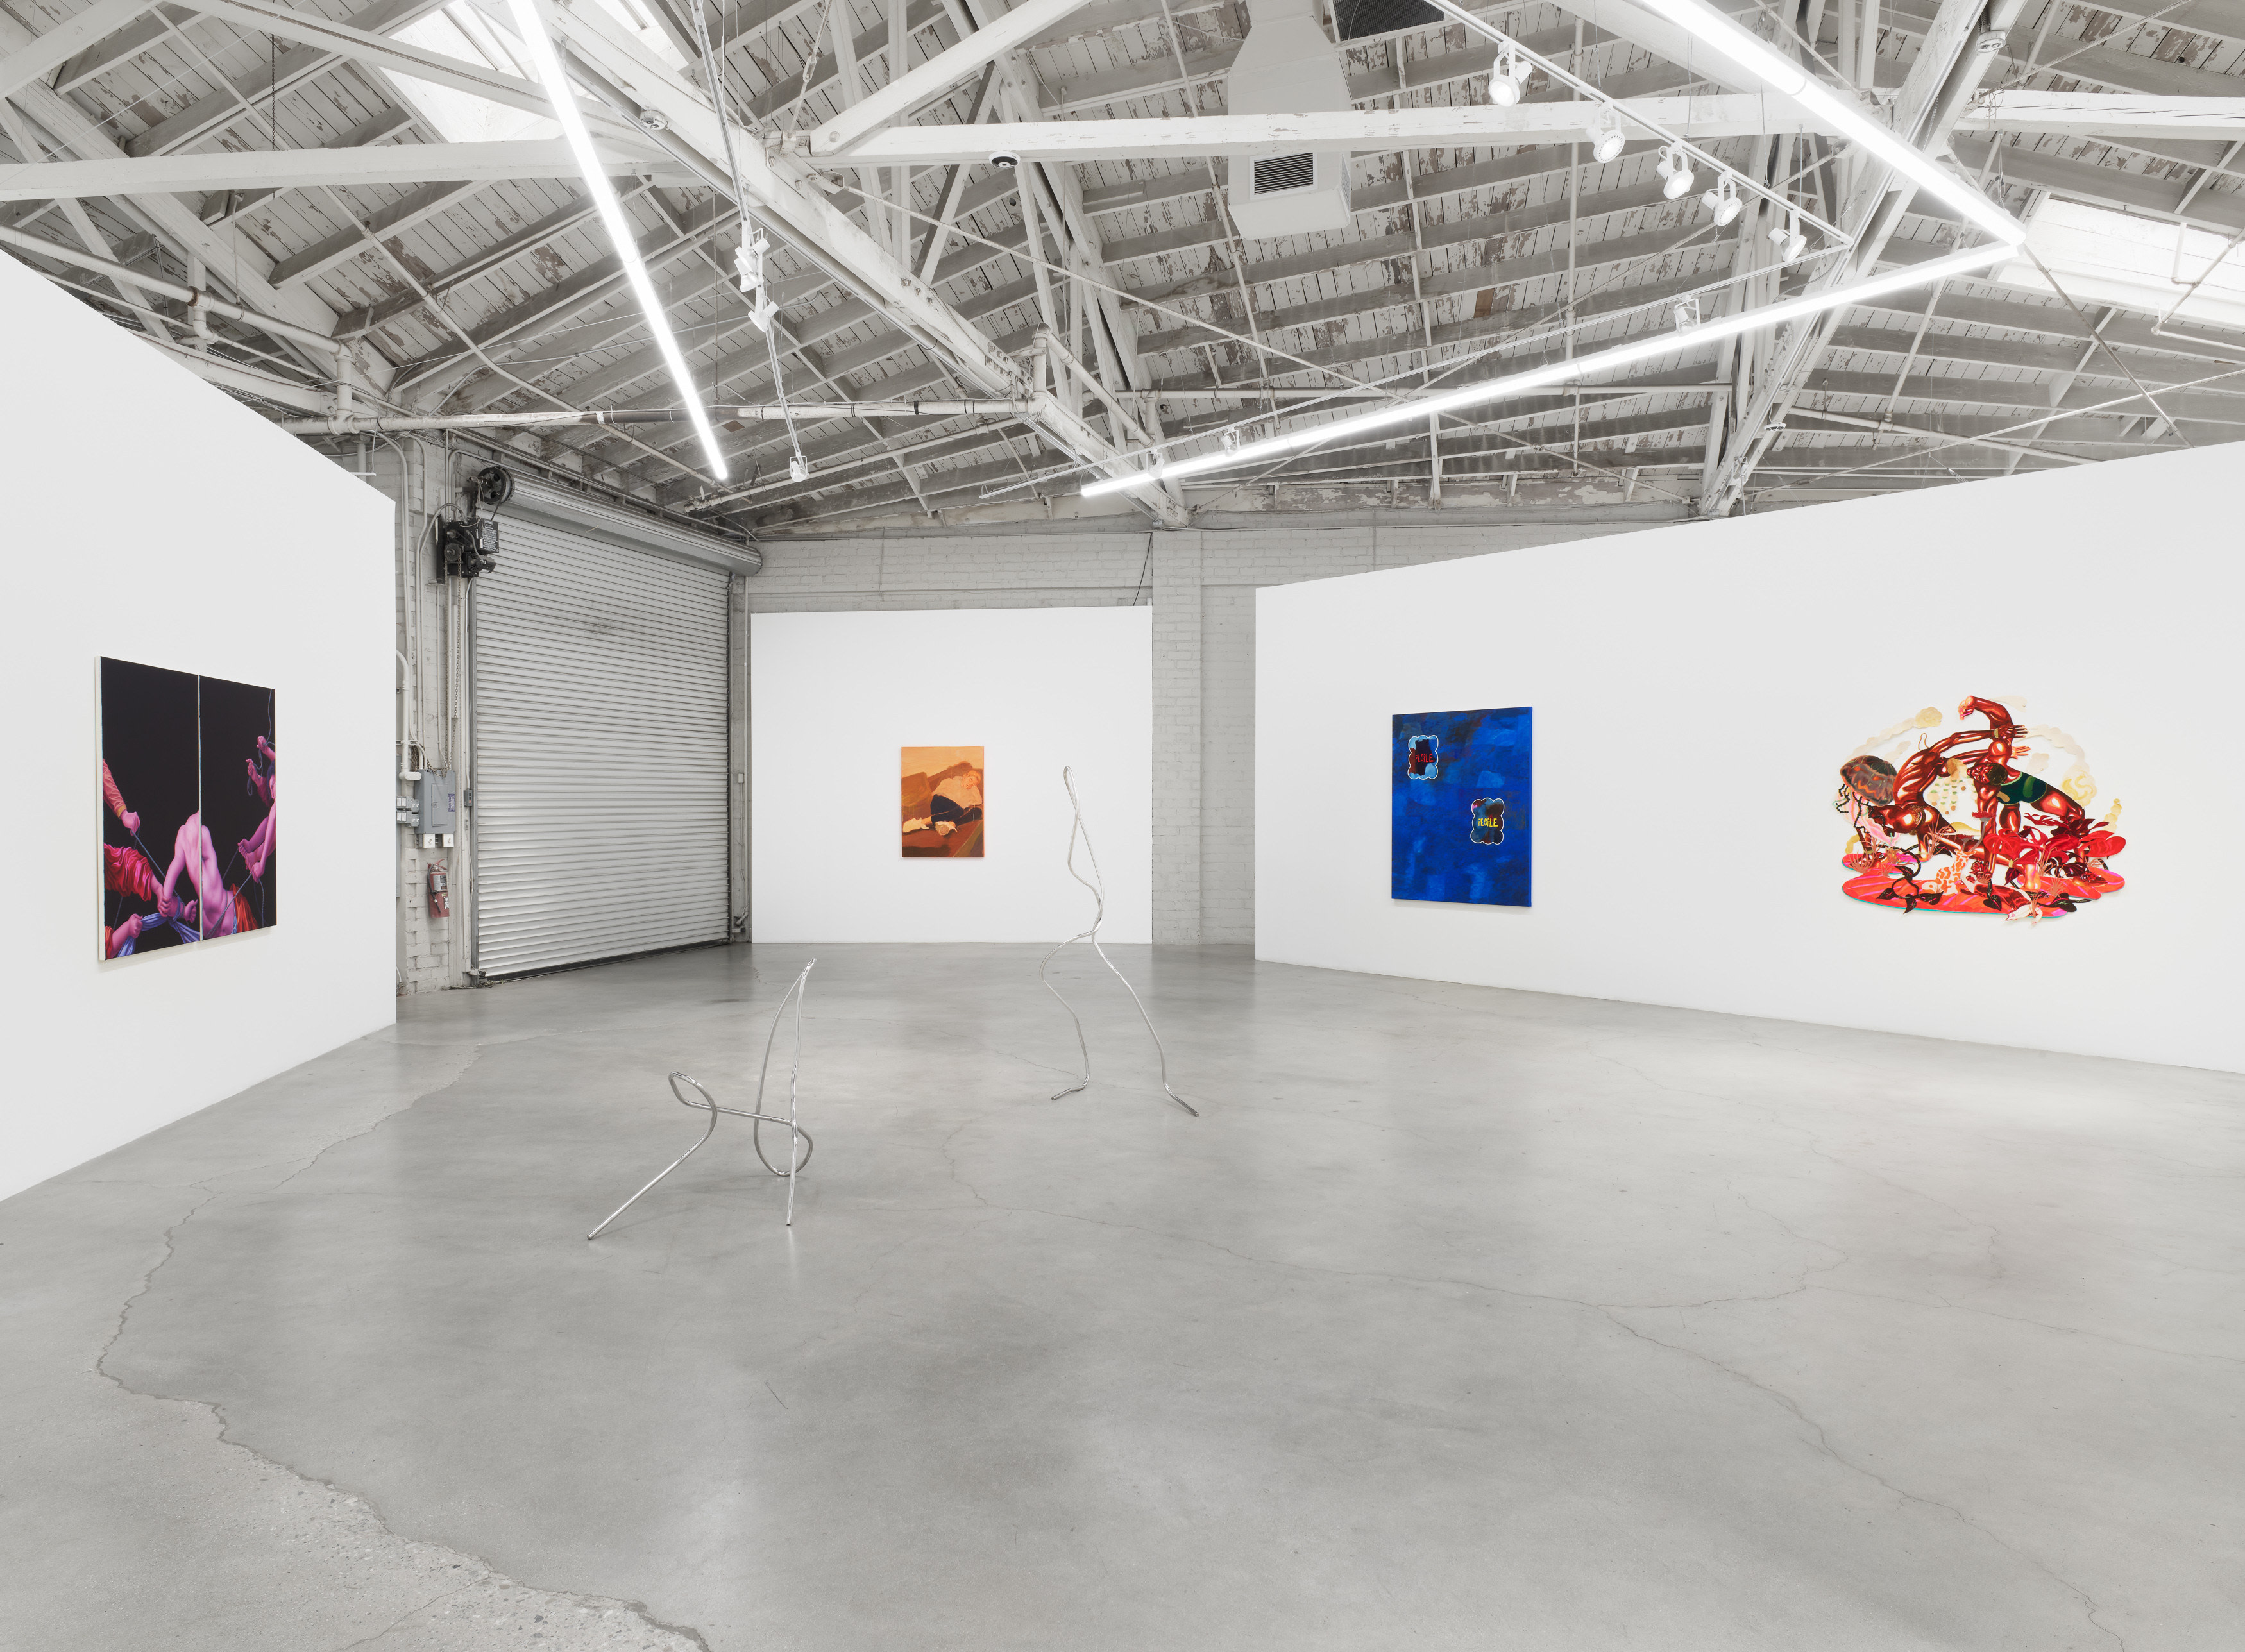 Installation view of Majeure Force, Part Two, featuring works by Jesse Mockrin, Josh Callaghan, Claire Tabouret, Marisa Takal, and Khari Johnson-Ricks. 